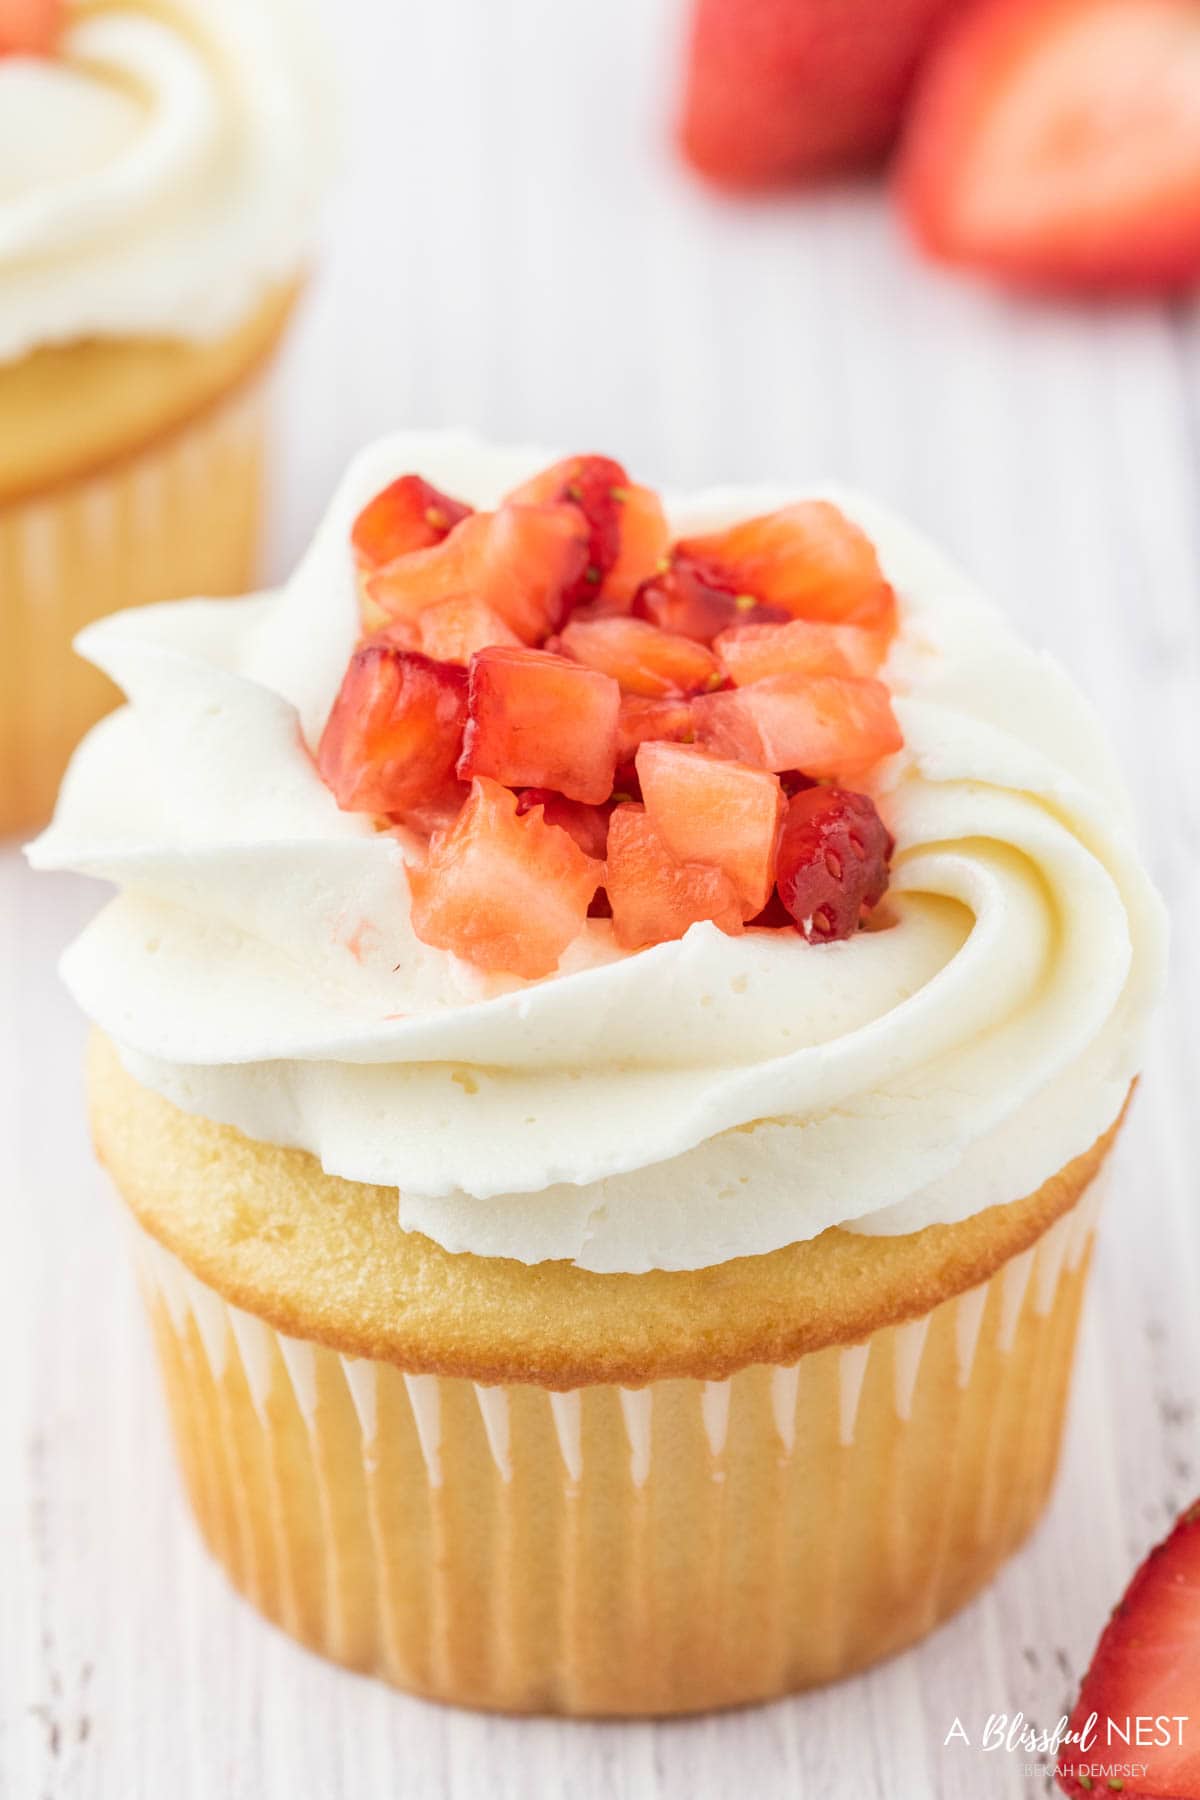 Strawberry cupcake with sliced strawberries on top